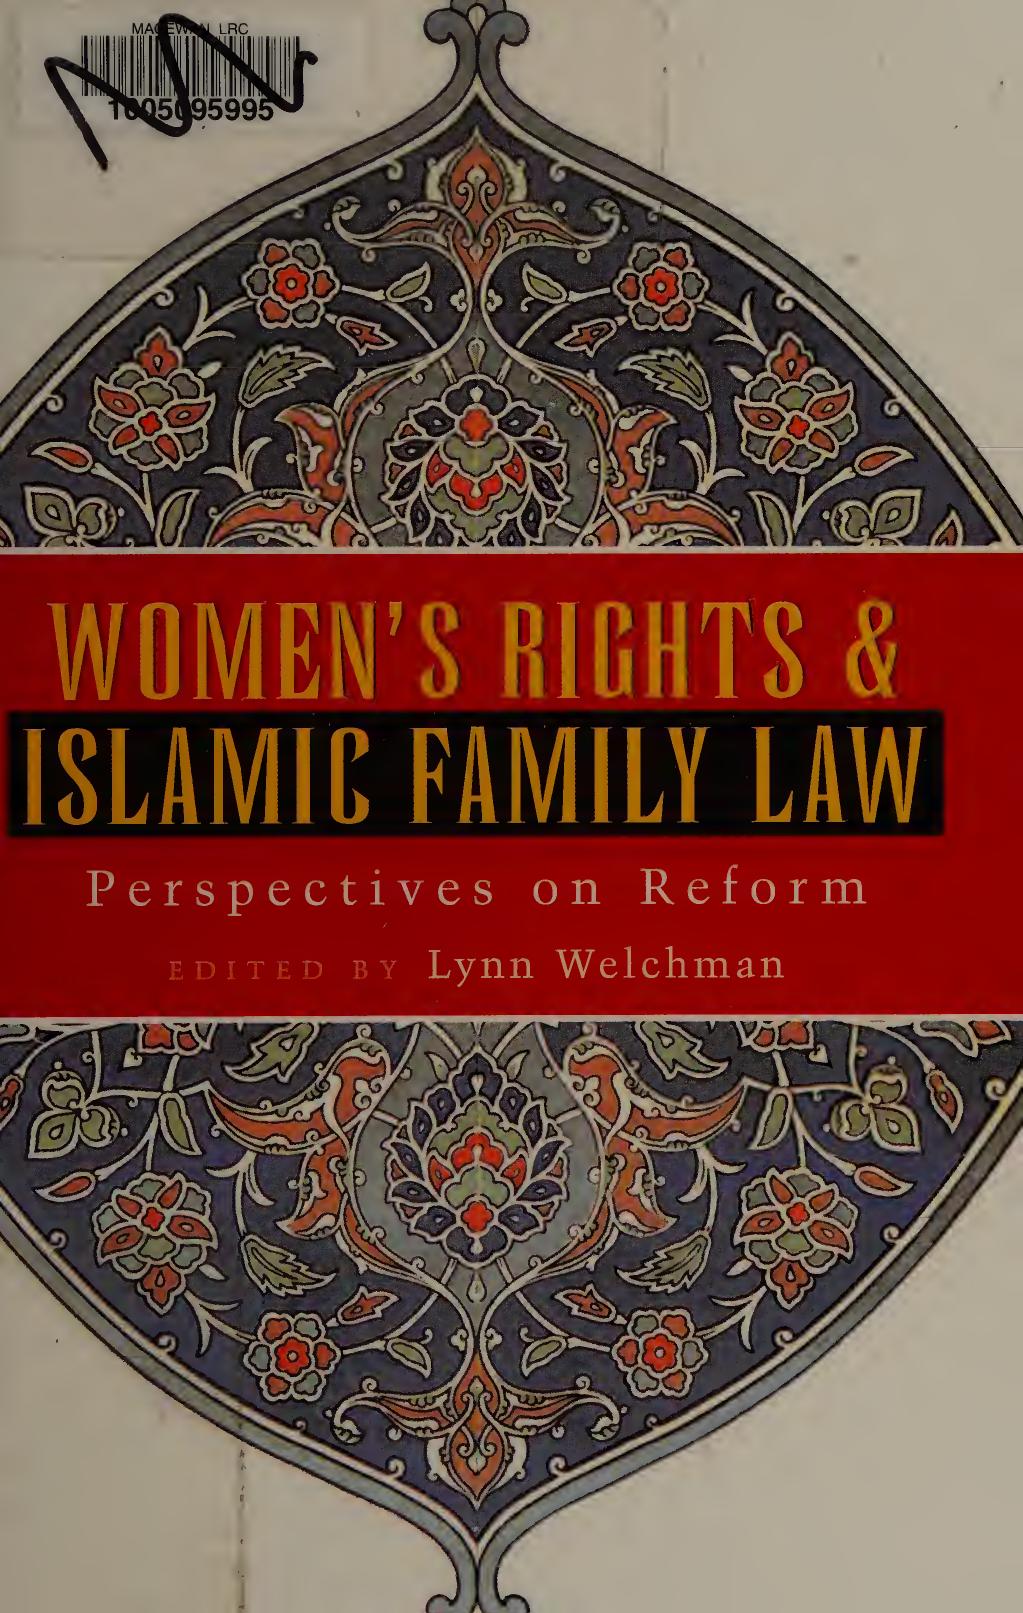 Women's Rights and Islamic Family Law: Perspectives on Reform by Lynn Welchman